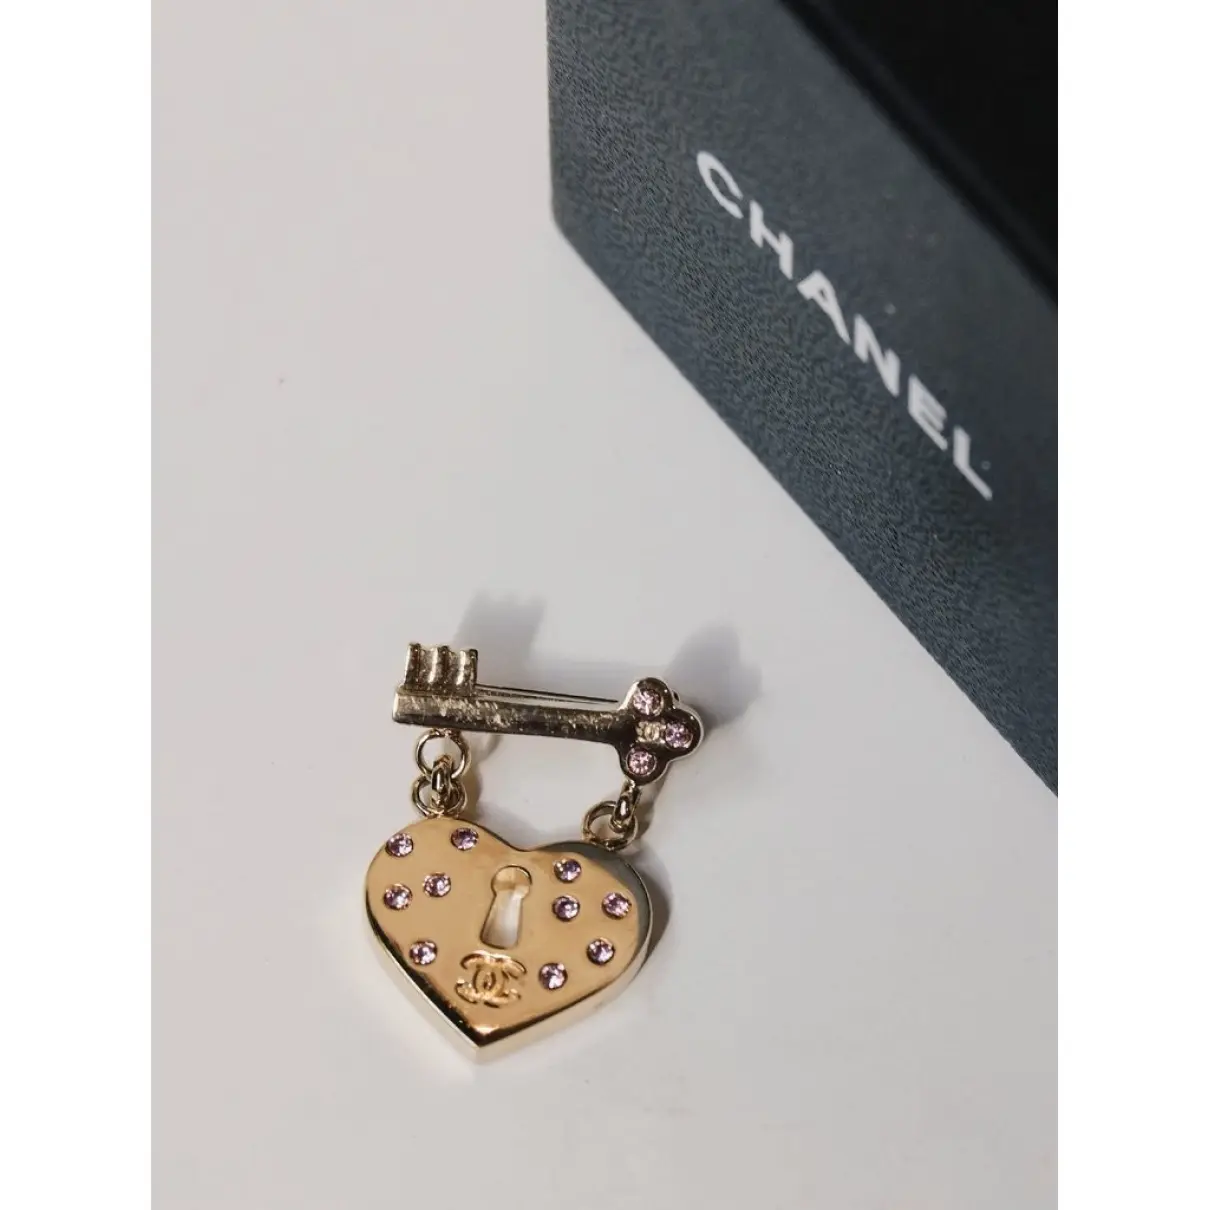 Chanel Pin & brooche for sale - Vintage